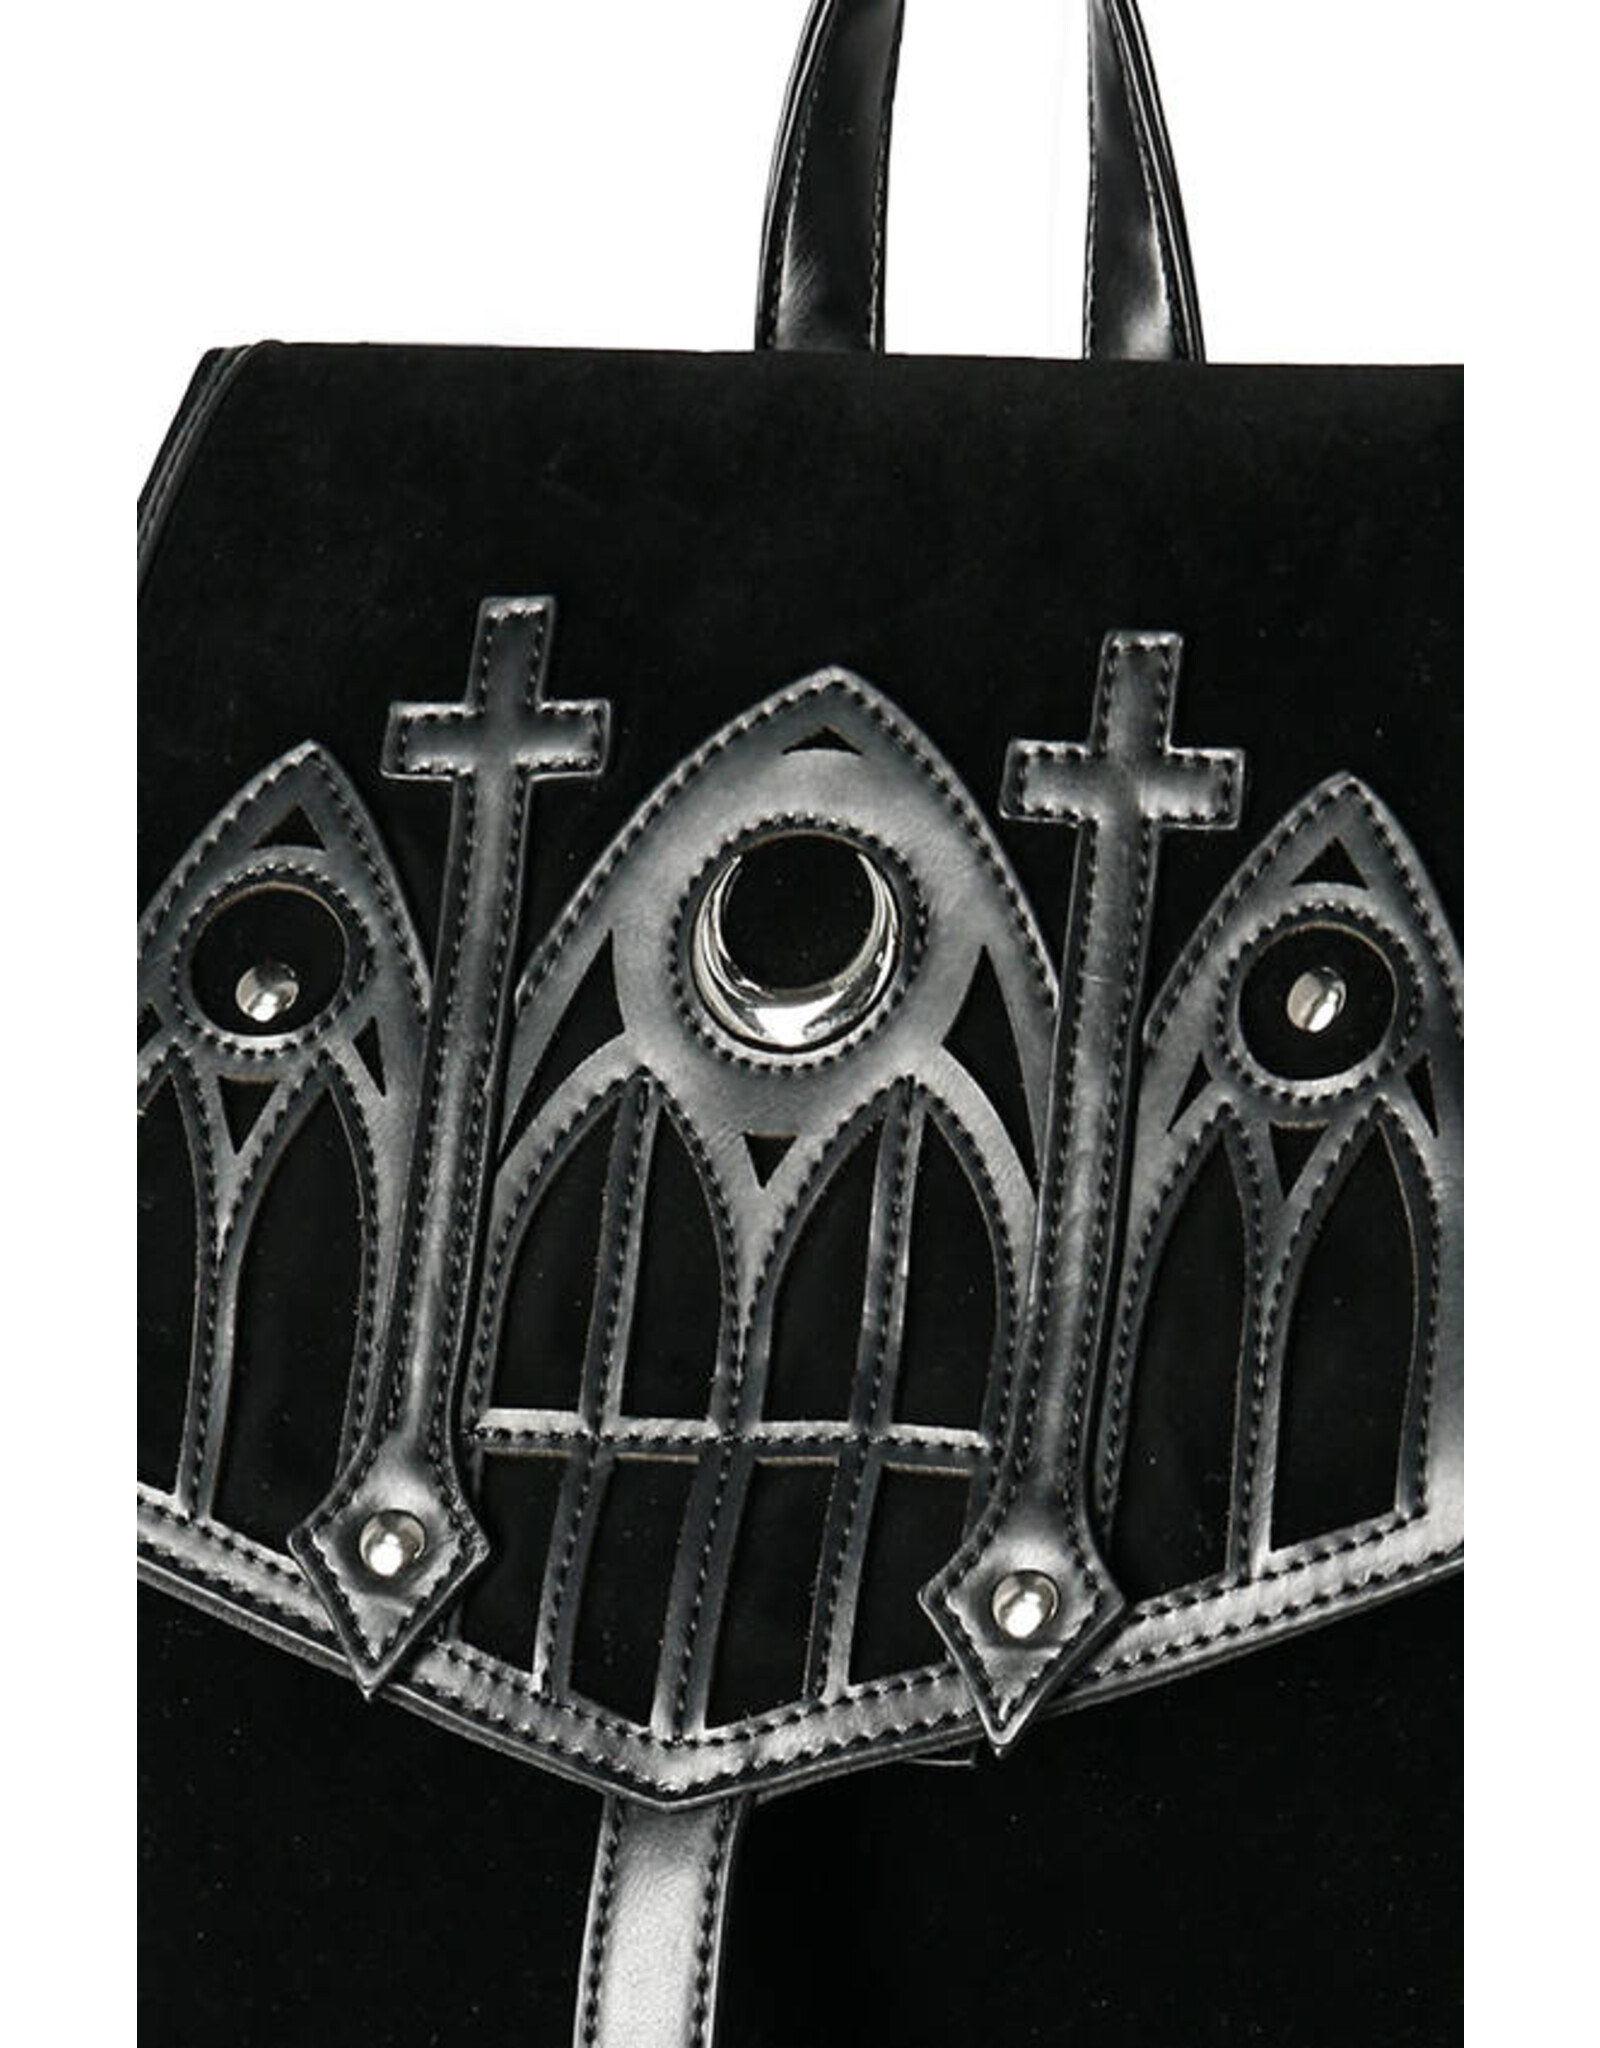 Restyle Gothic bags Steampunk bags - Gothic Cathedral Backpack Black Velvet Restyle